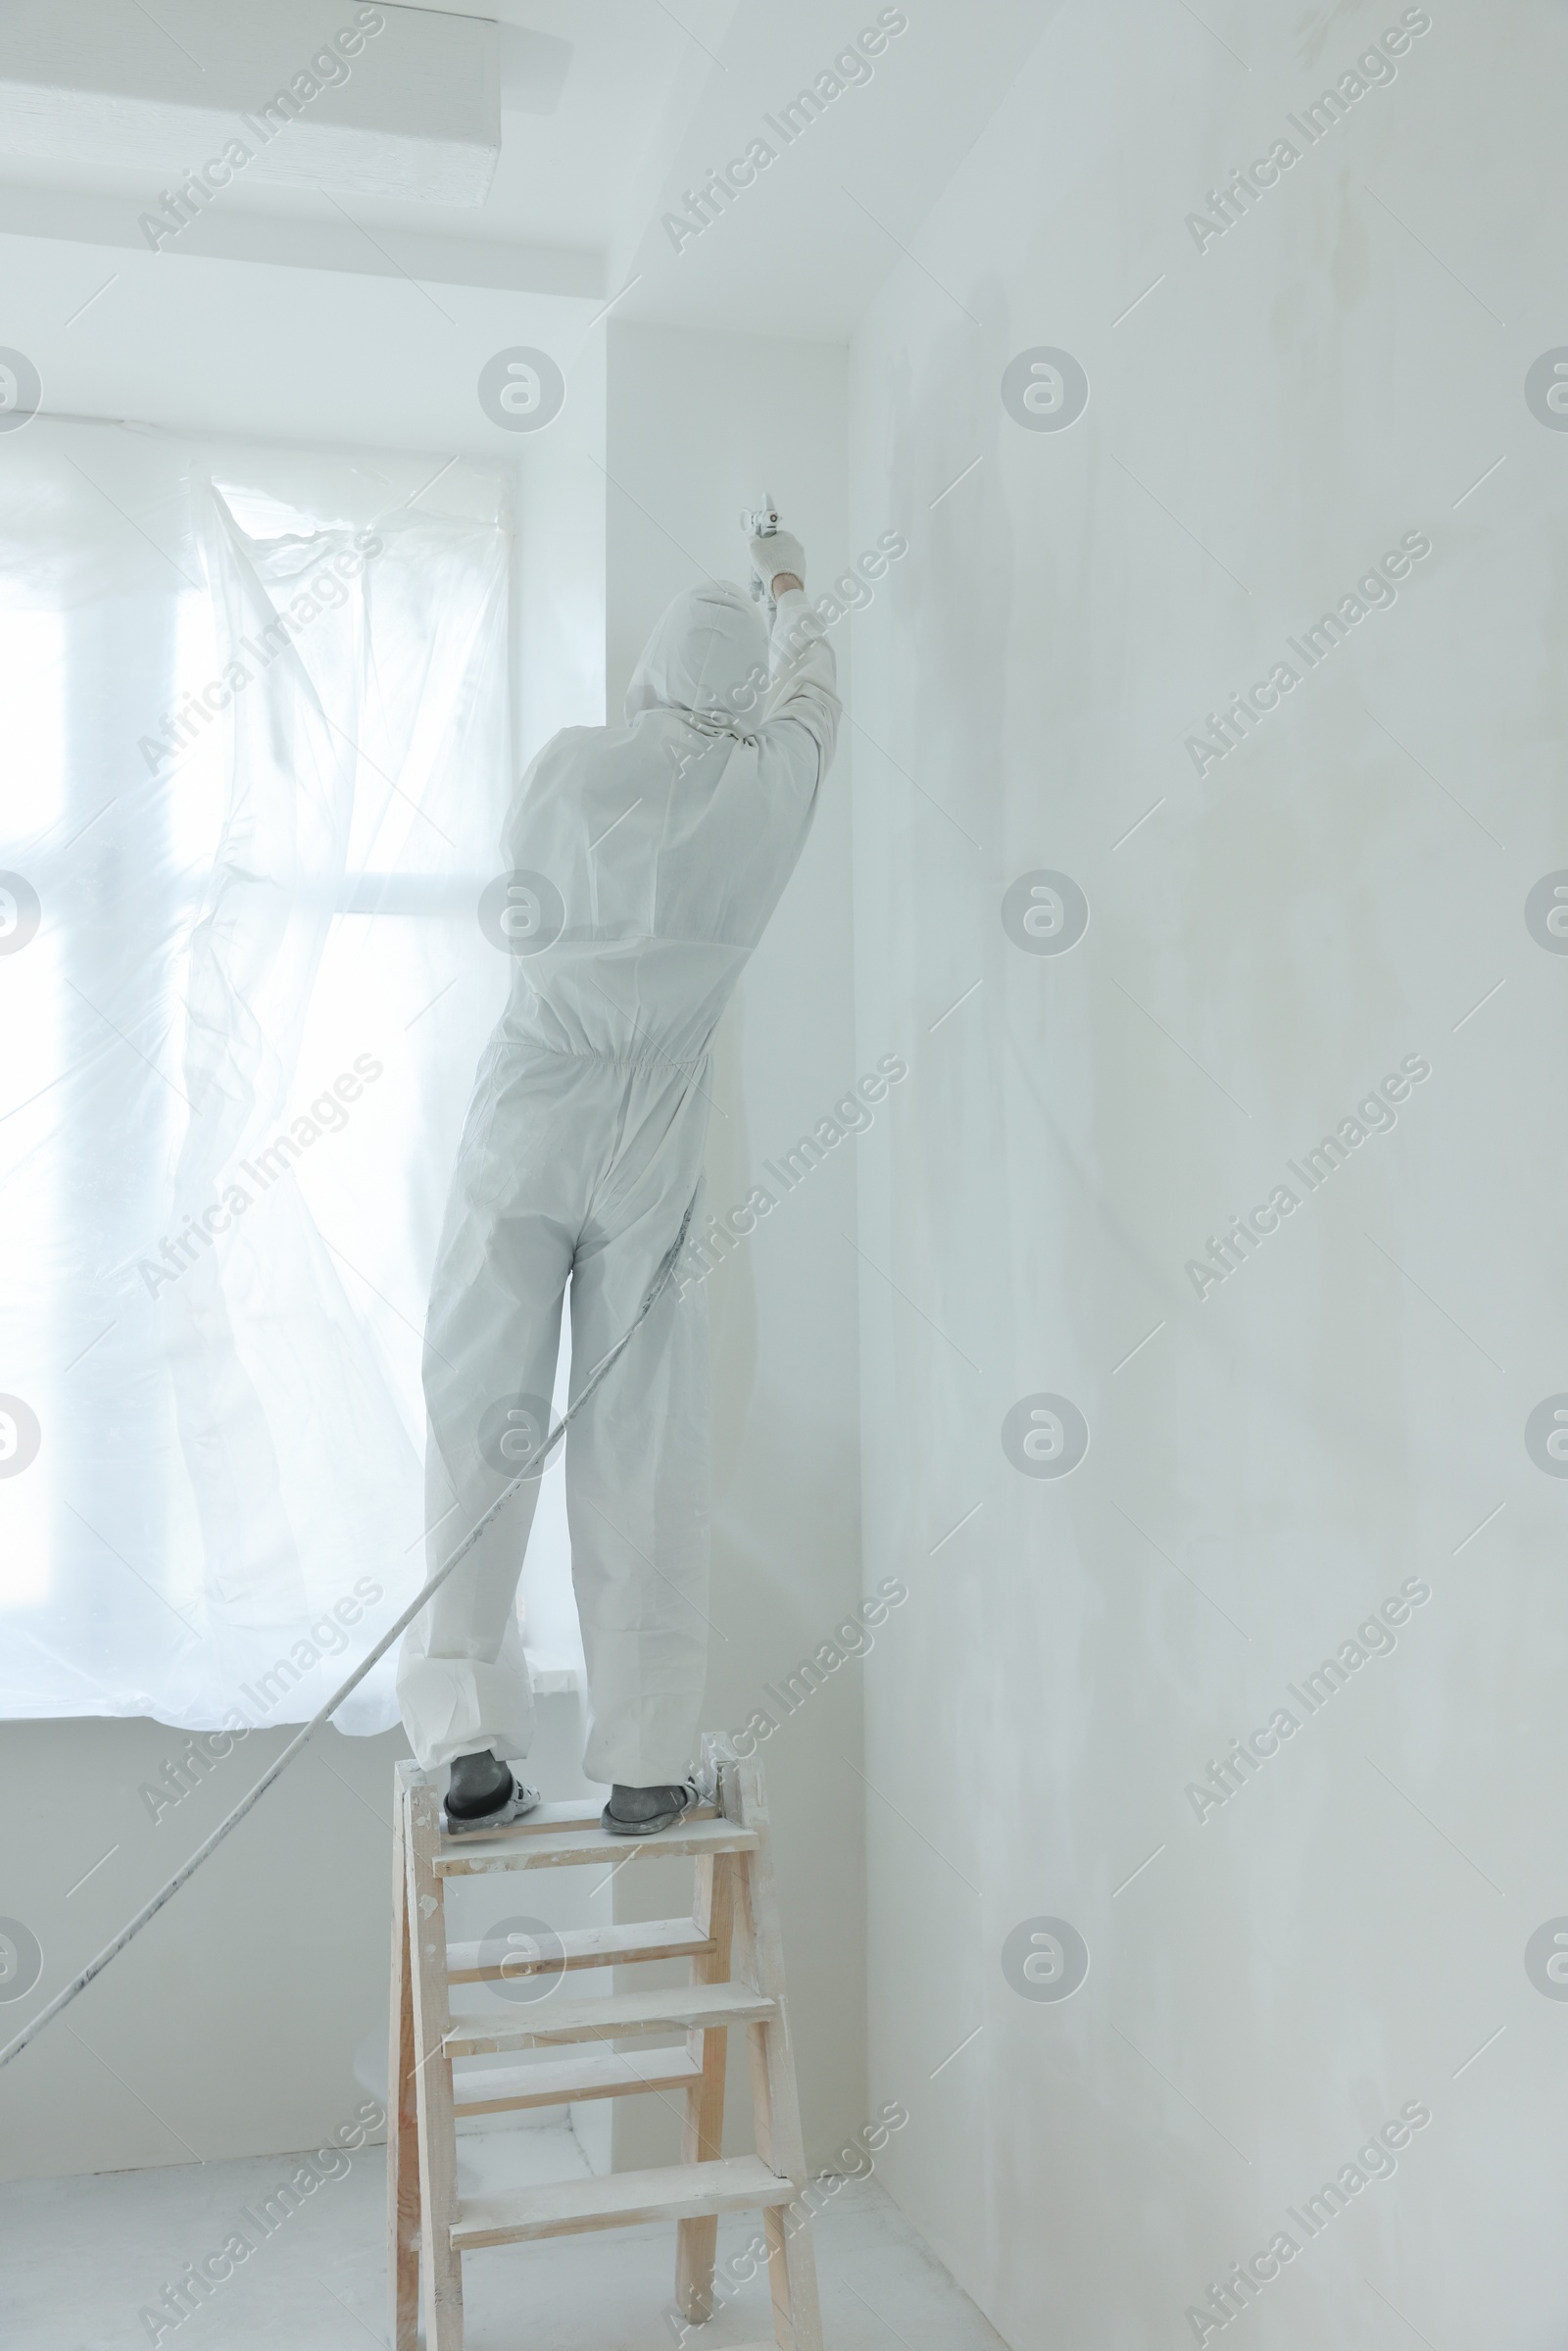 Photo of Decorator painting wall on ladder near windows indoors, back view